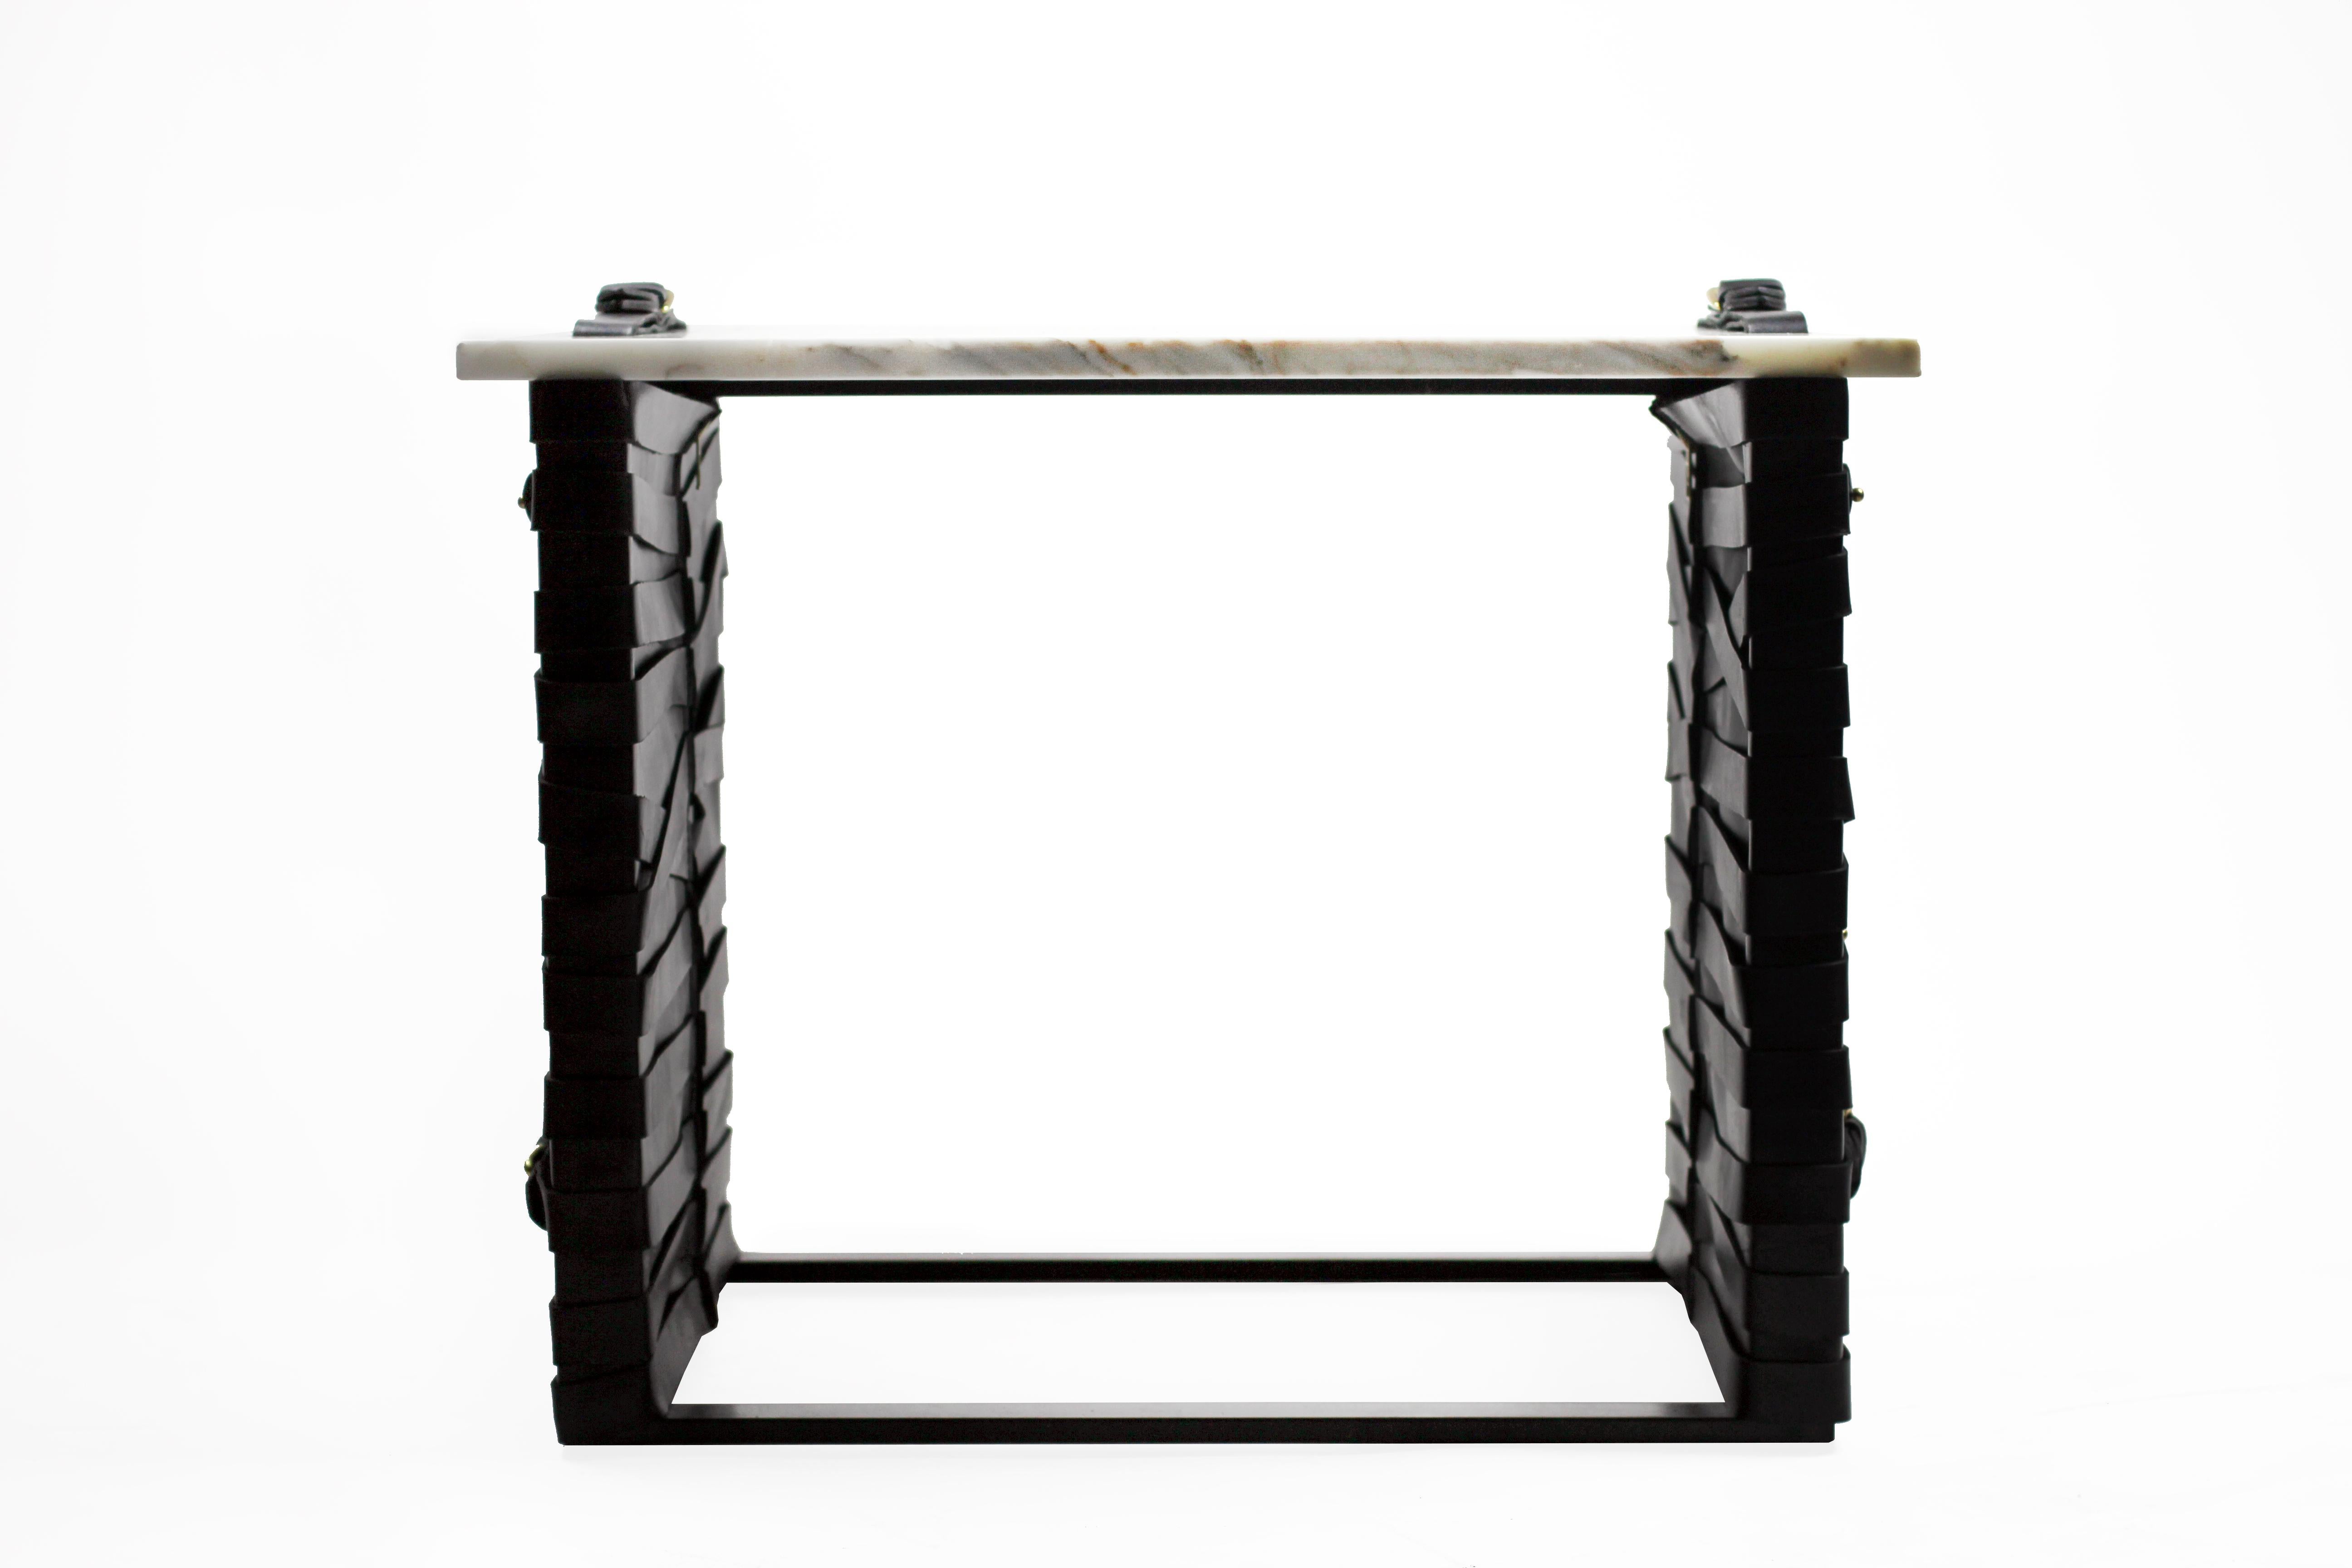 The (wh)ORE HAüS STUDIOS restraint accent table is made of blackened steel, marble, brass accents and leather panels. This table is made to order and can, therefore, be customized. As pictured, blackened steel, Calacatta gold marble and black